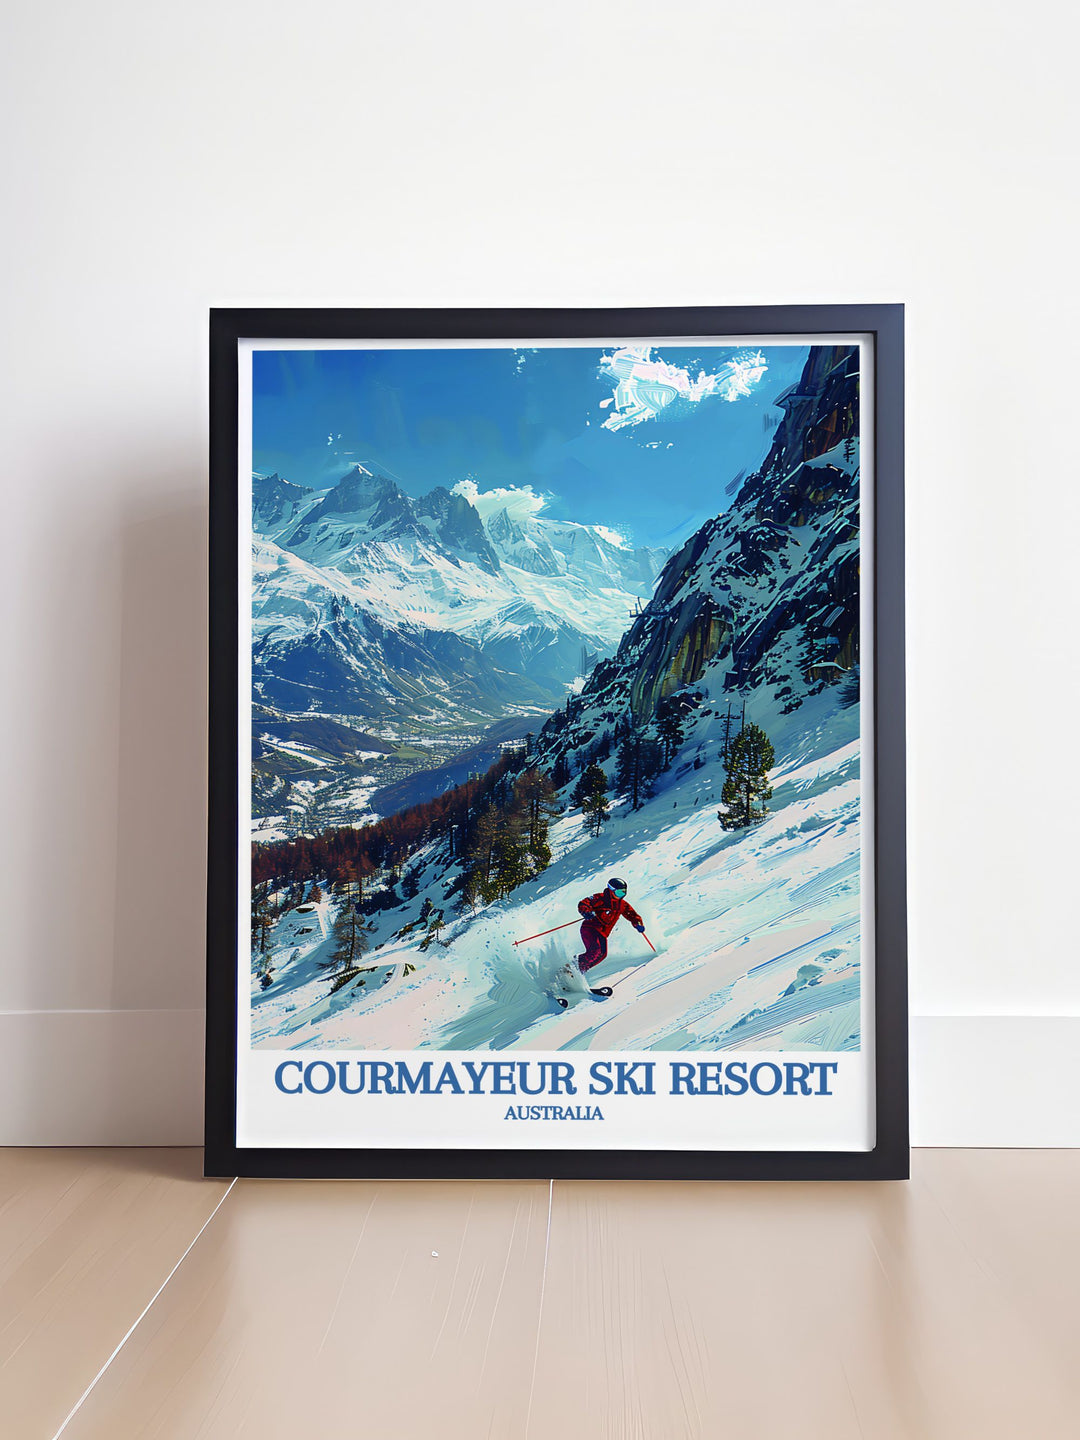 Illustrated with care, this travel poster brings to life the stunning slopes of Courmayeur and the iconic views of Mont Blanc, ideal for enhancing any room with the charm of Italys Aosta Valley.